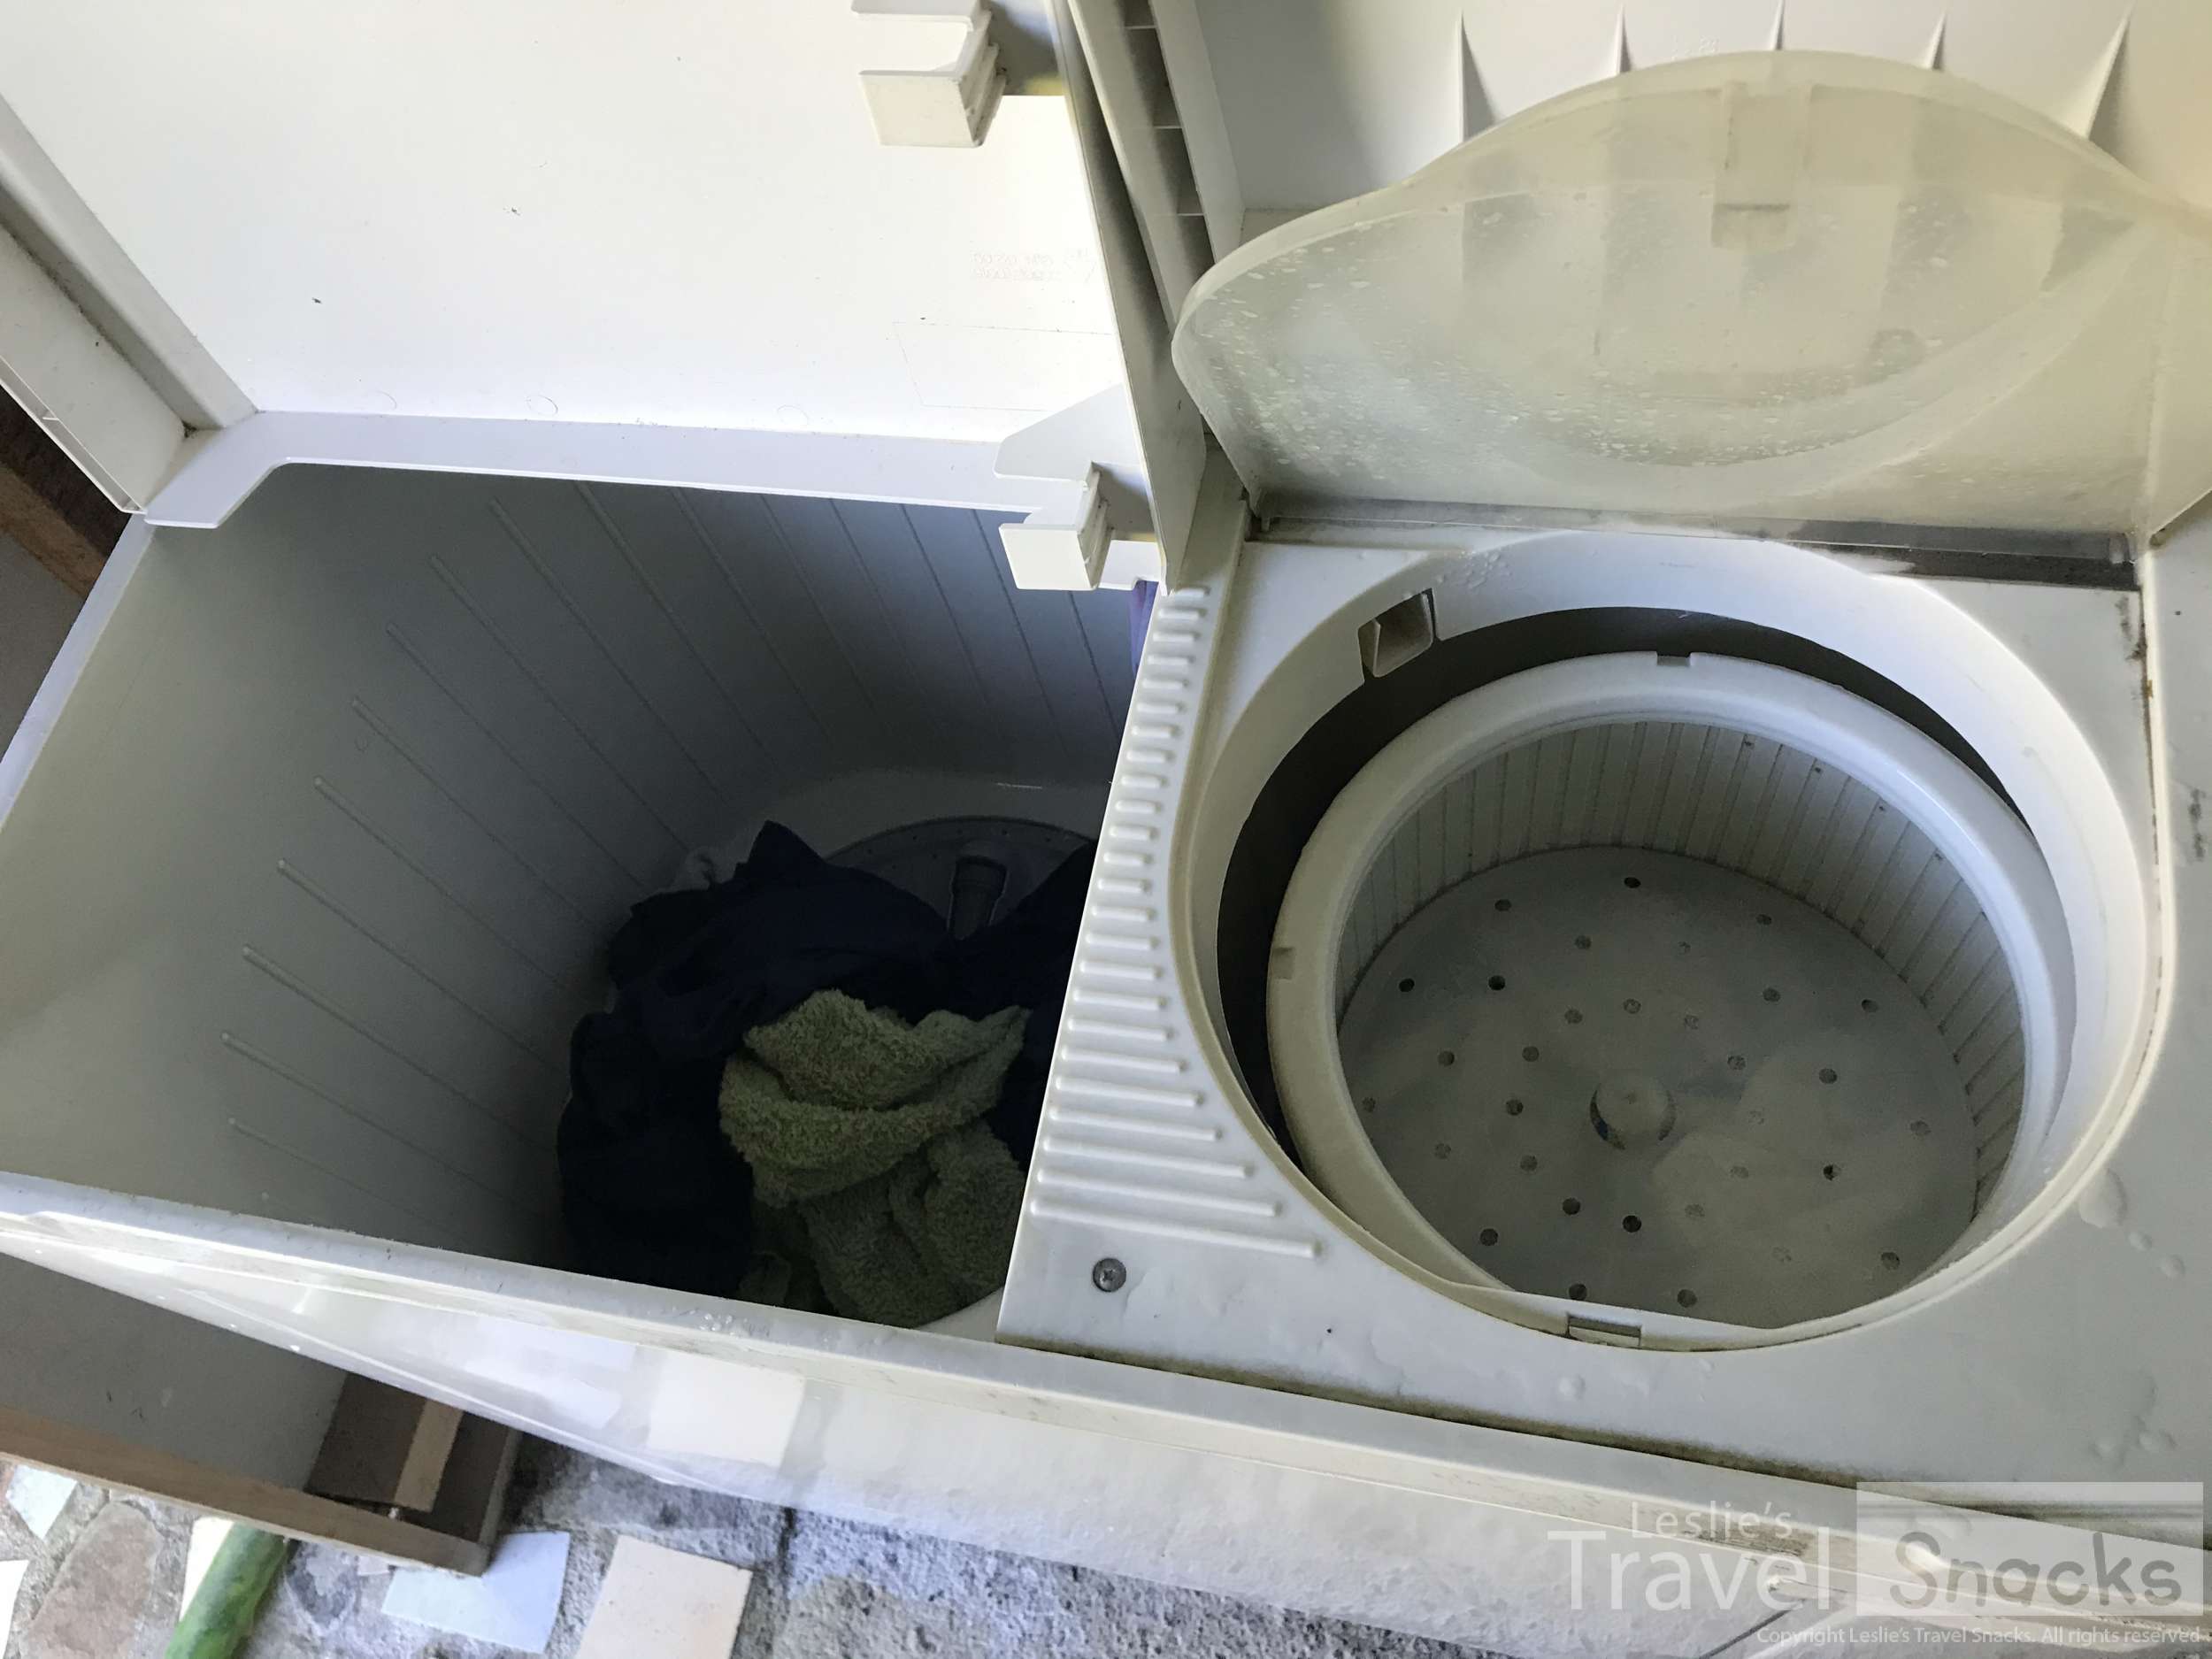 You can just leave some of your clothes in the wash side if you need to do more than one rinse / spin cycle.